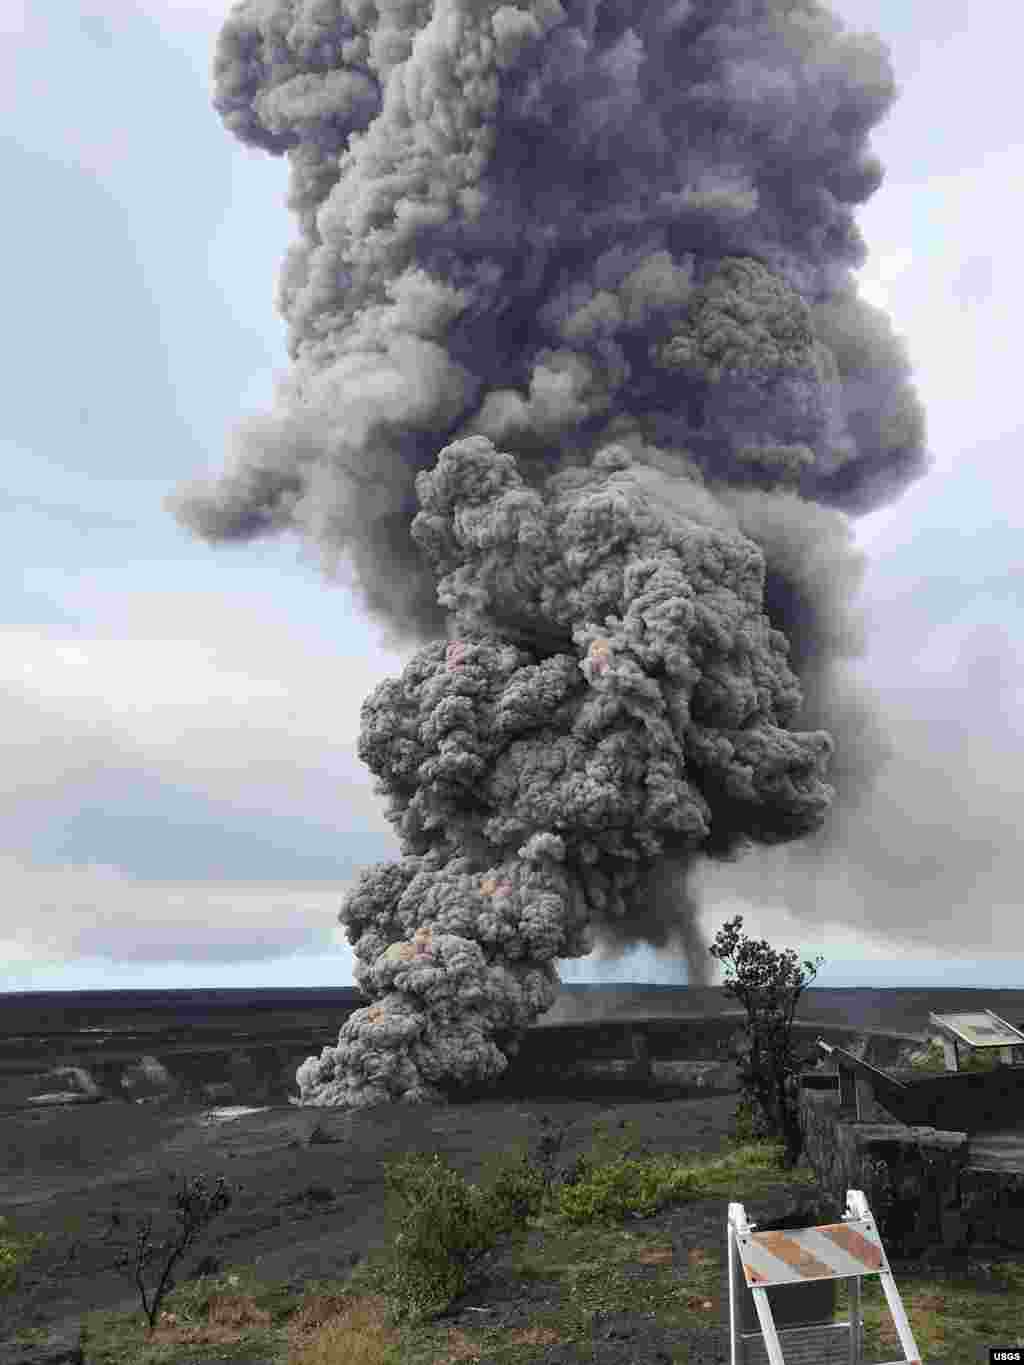 Ash column rises from the Overlook crater at the summit of Kīlauea Volcano, May 9, 2018. HVO&#39;s interpretation is that the explosion was triggered by a rockfall from the steep walls of Overlook crater.